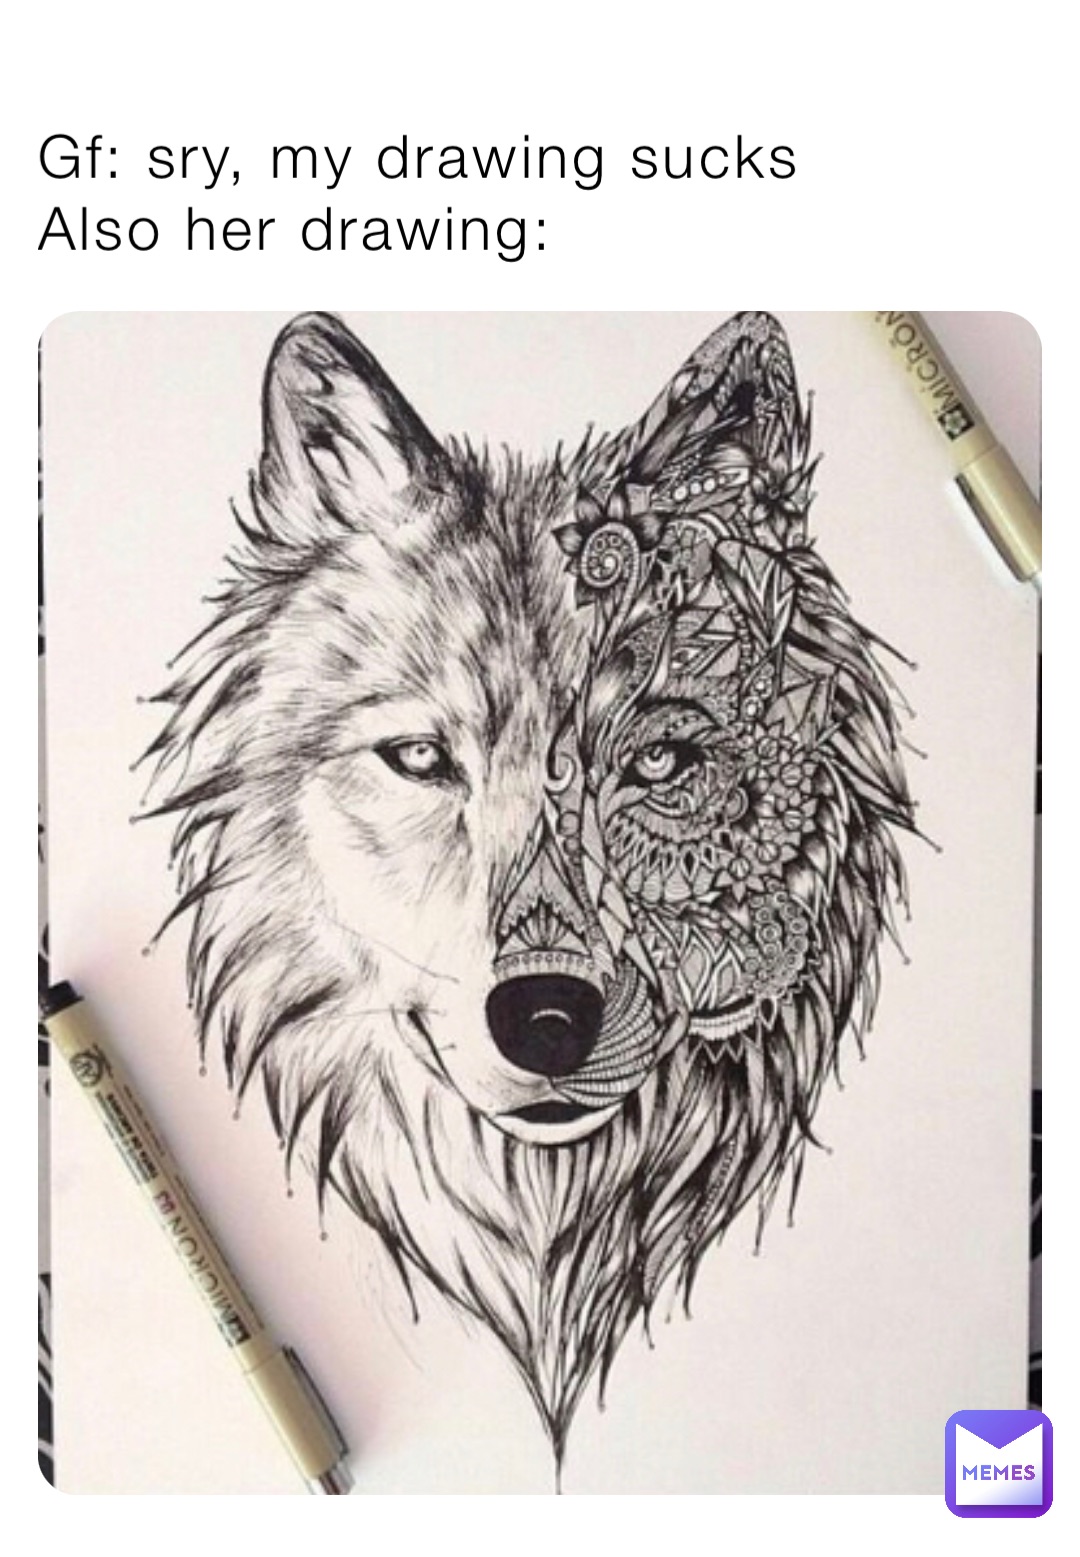 Gf: sry, my drawing sucks
Also her drawing: